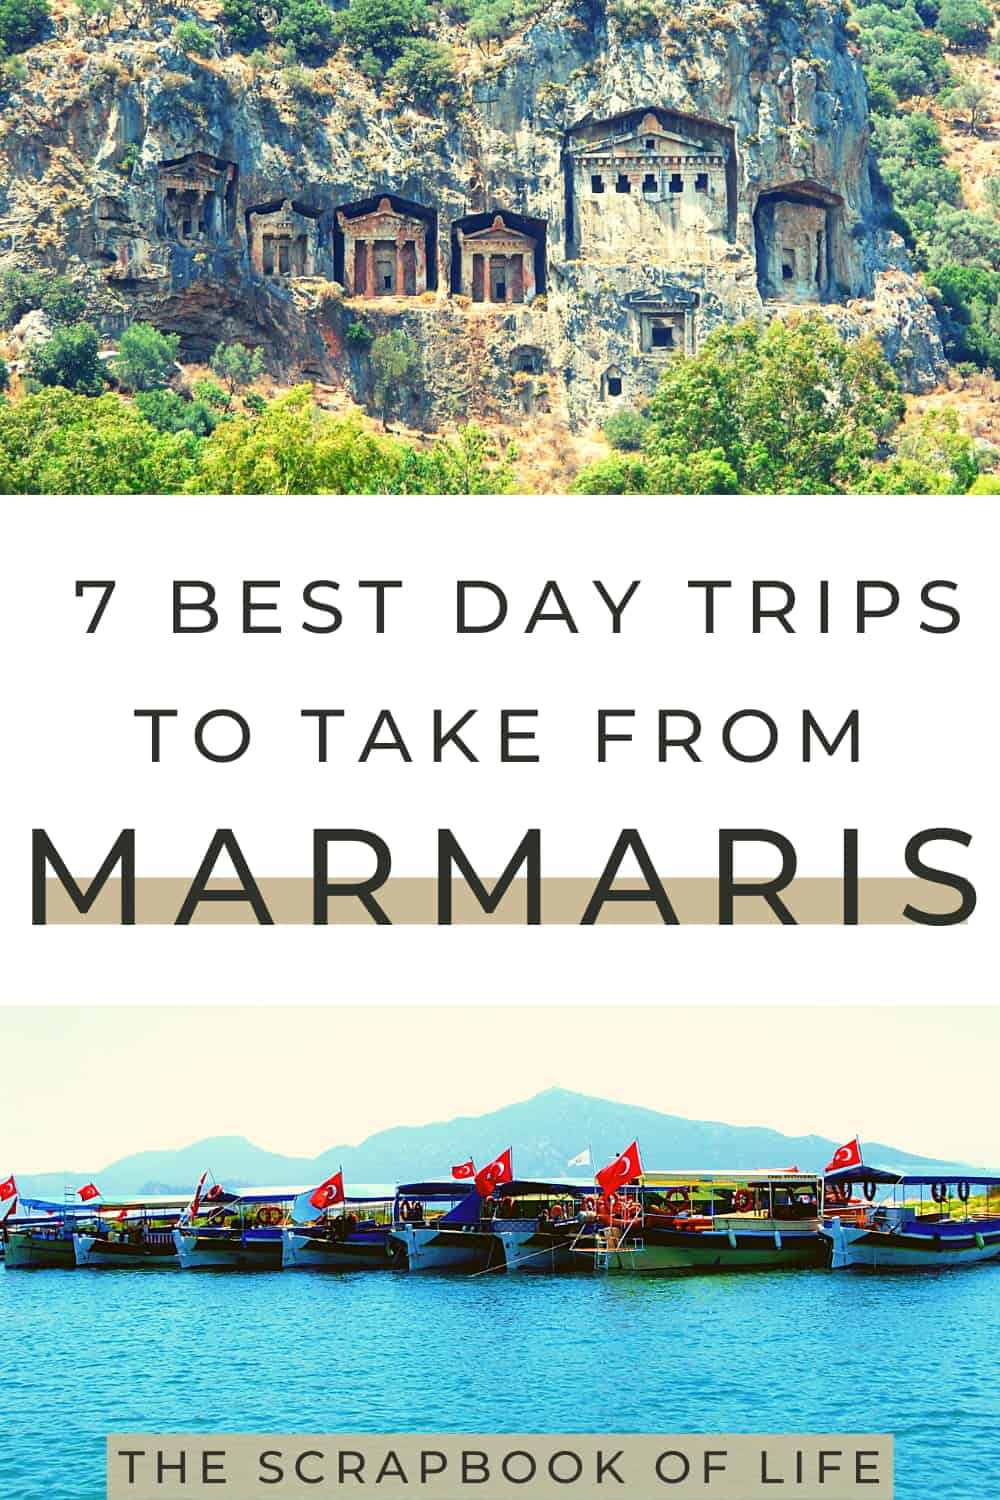 Marmaris Excursions - 7 Very Best Day Trips From Marmaris, Turkey